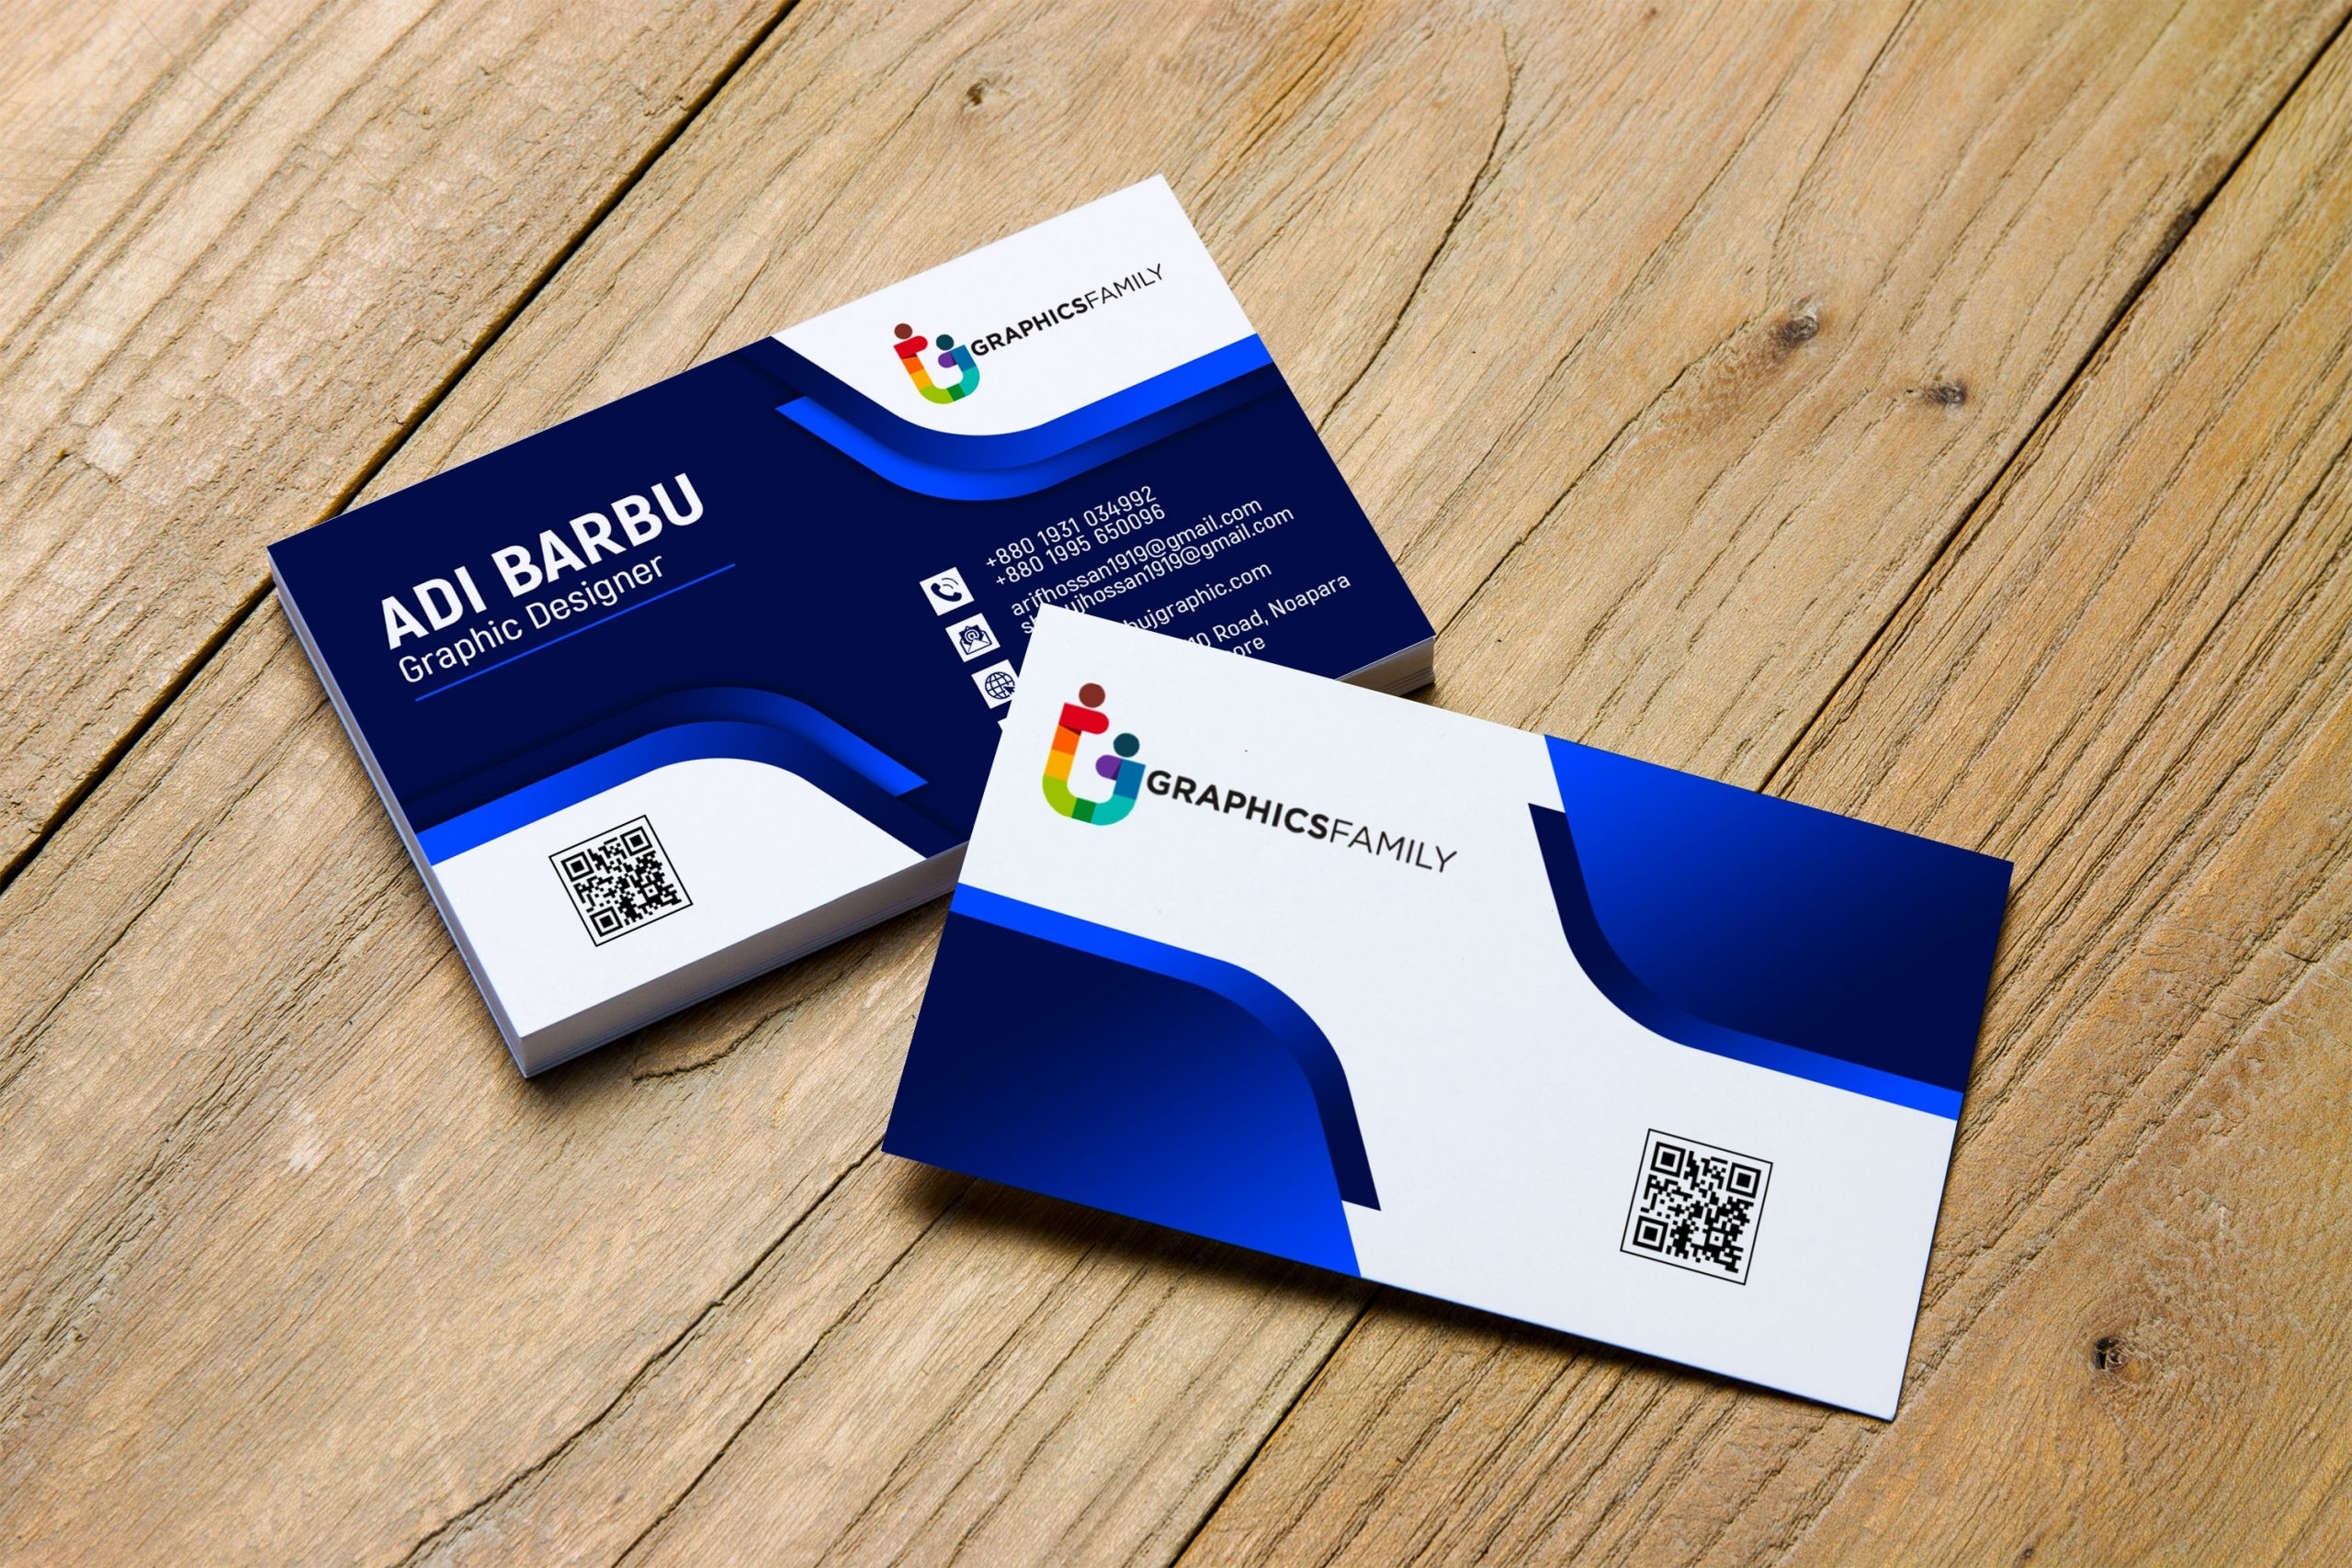 Professional Business Card Design Free Psd Download - Graphicsfamily within Visiting Card Psd Template Free Download